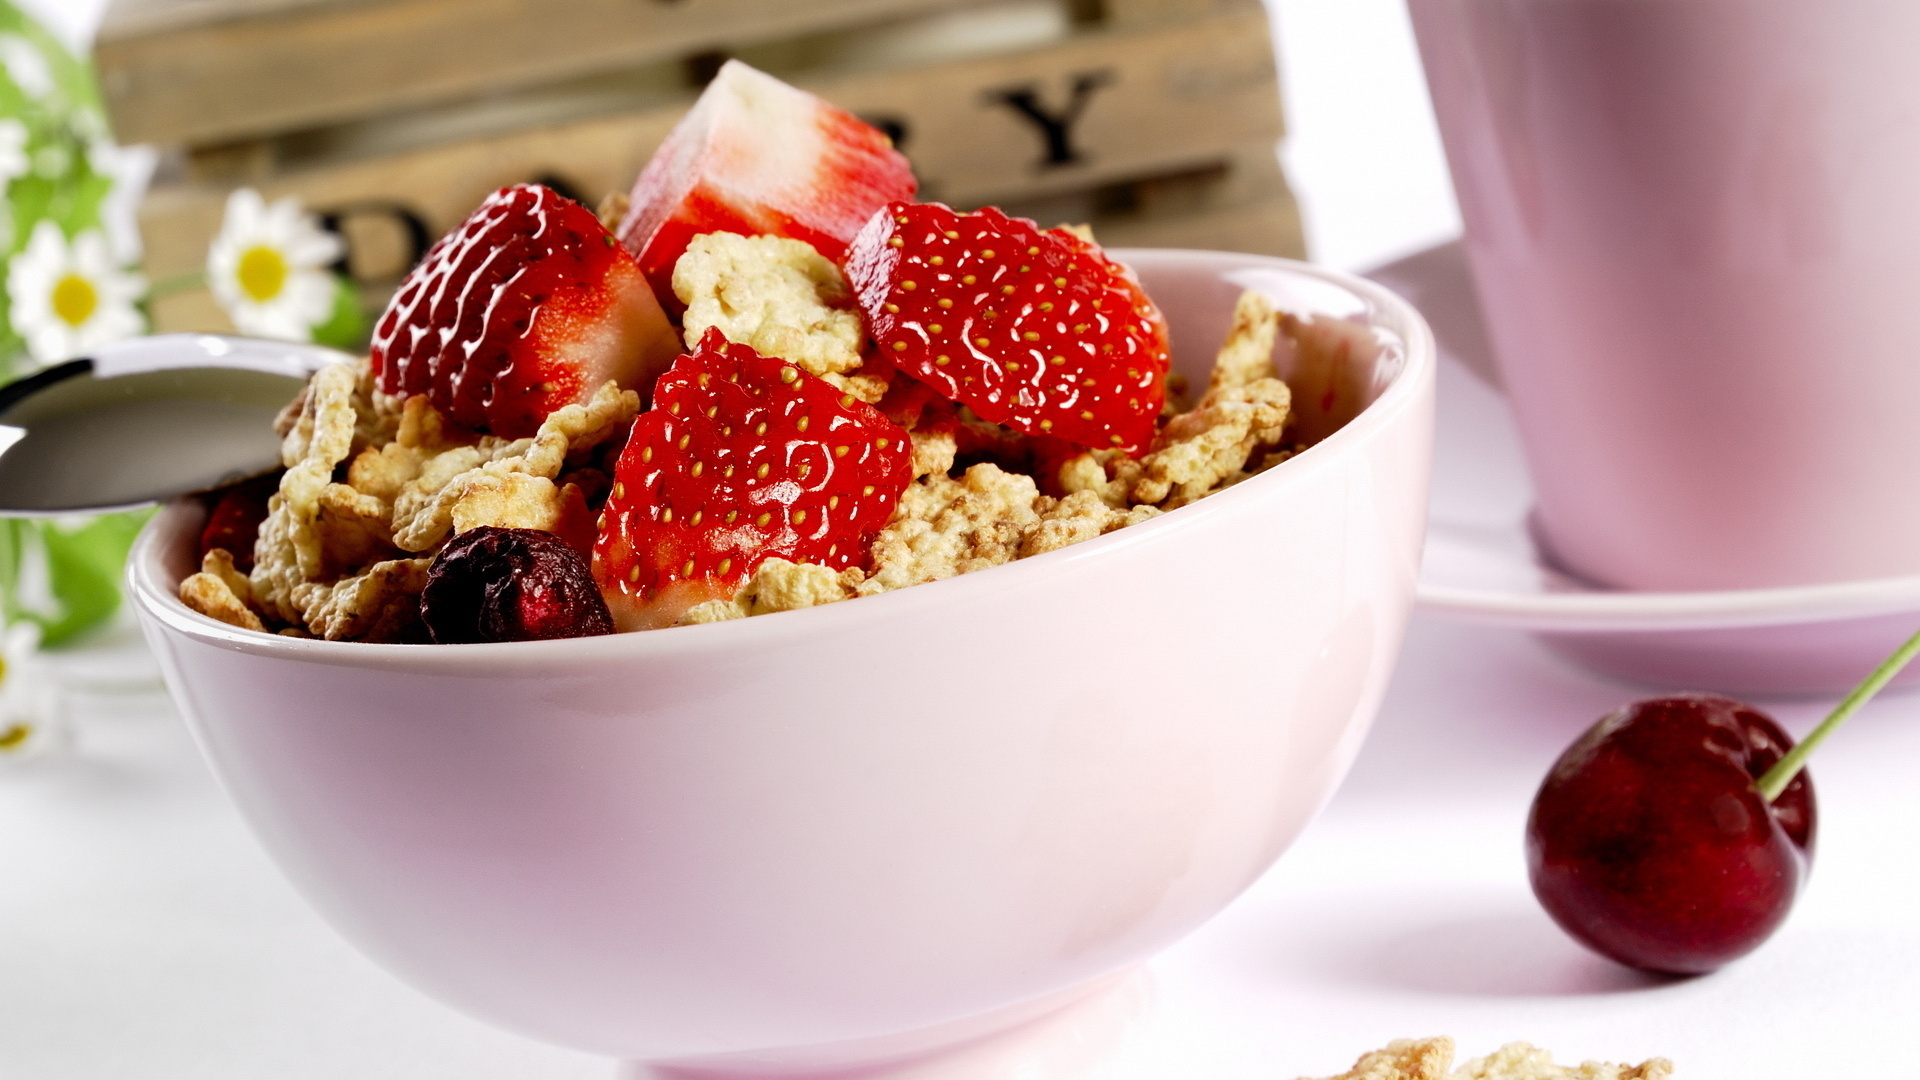 A bowl of healthy oats with strawberry slices as topping